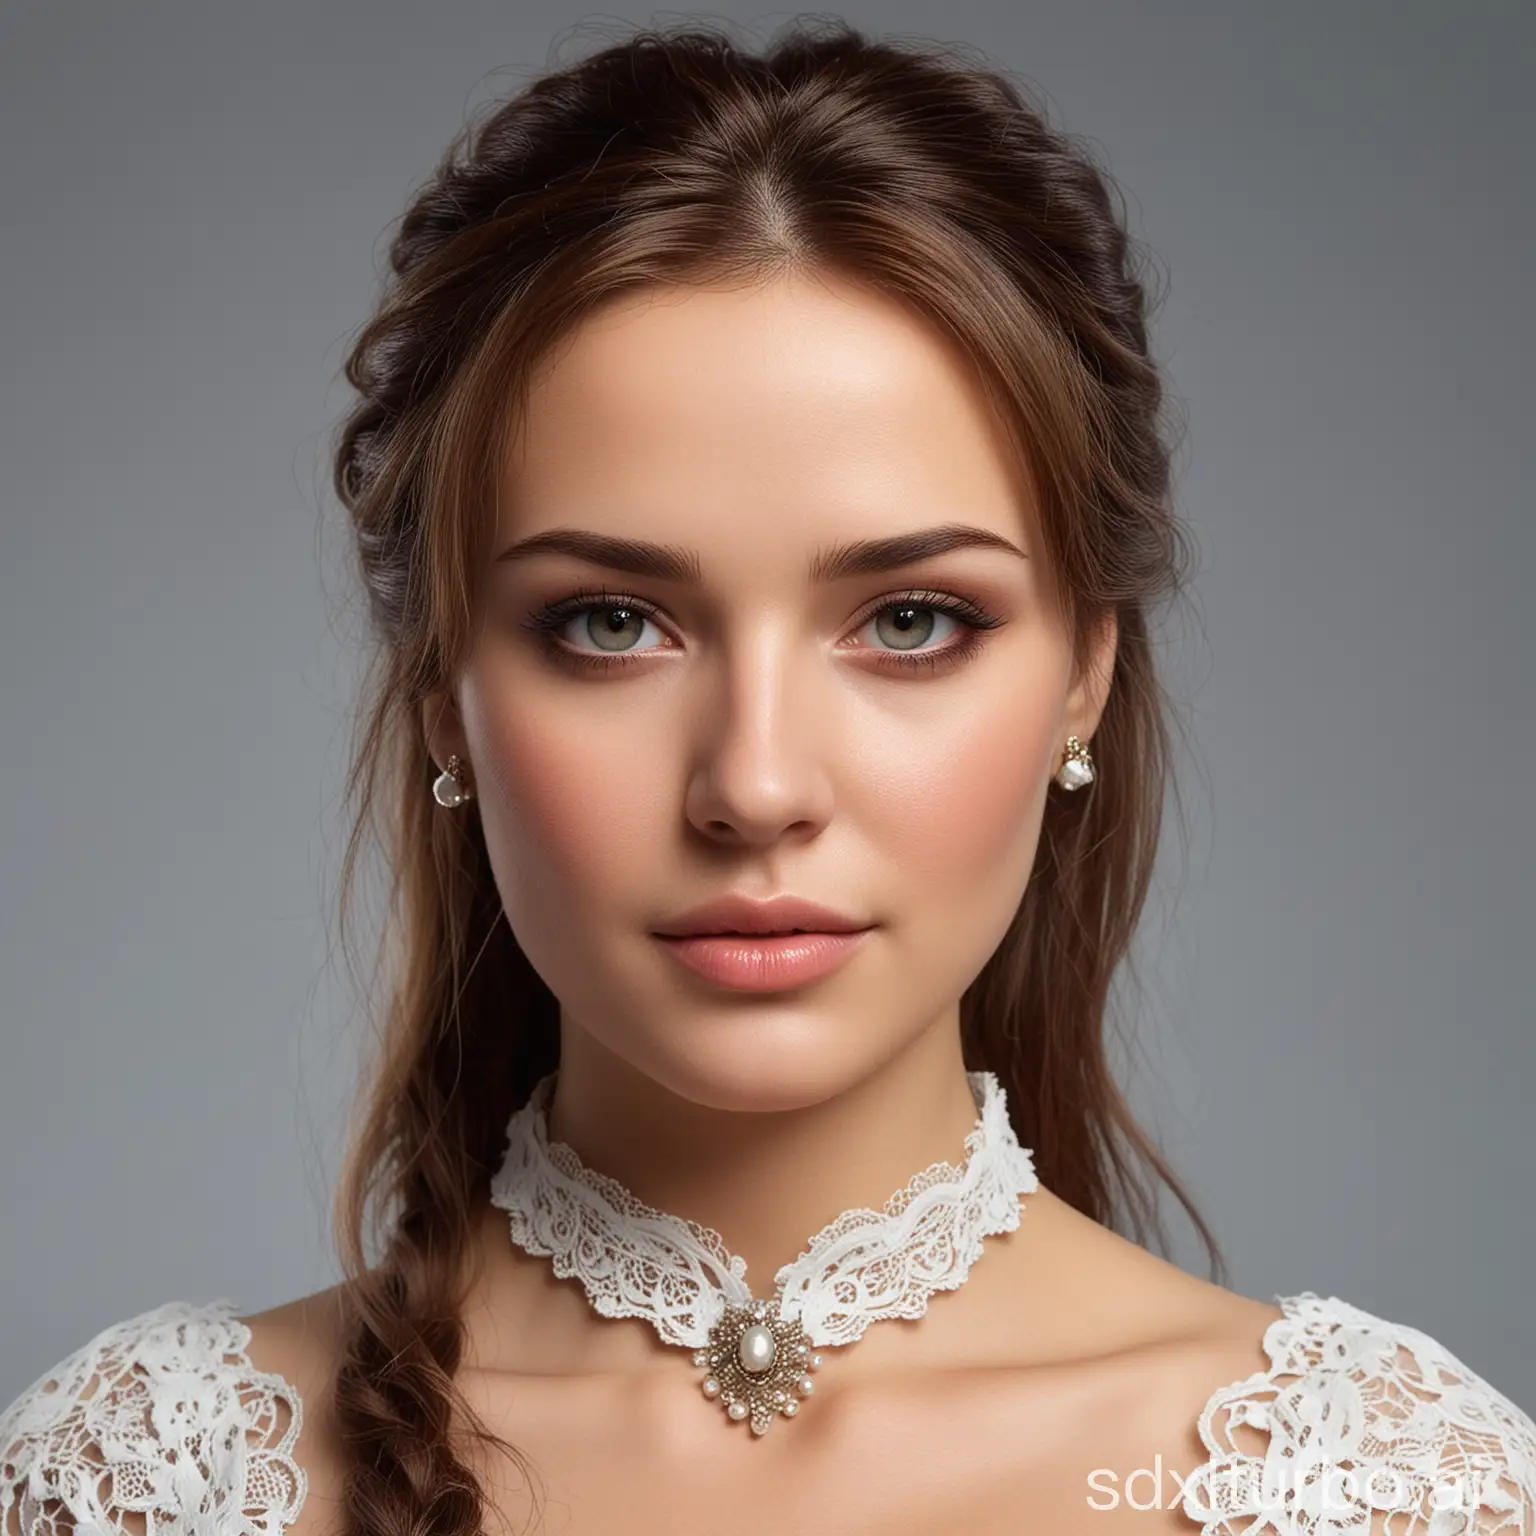 Realistic-Portrait-of-a-Beautifully-Dressed-Woman